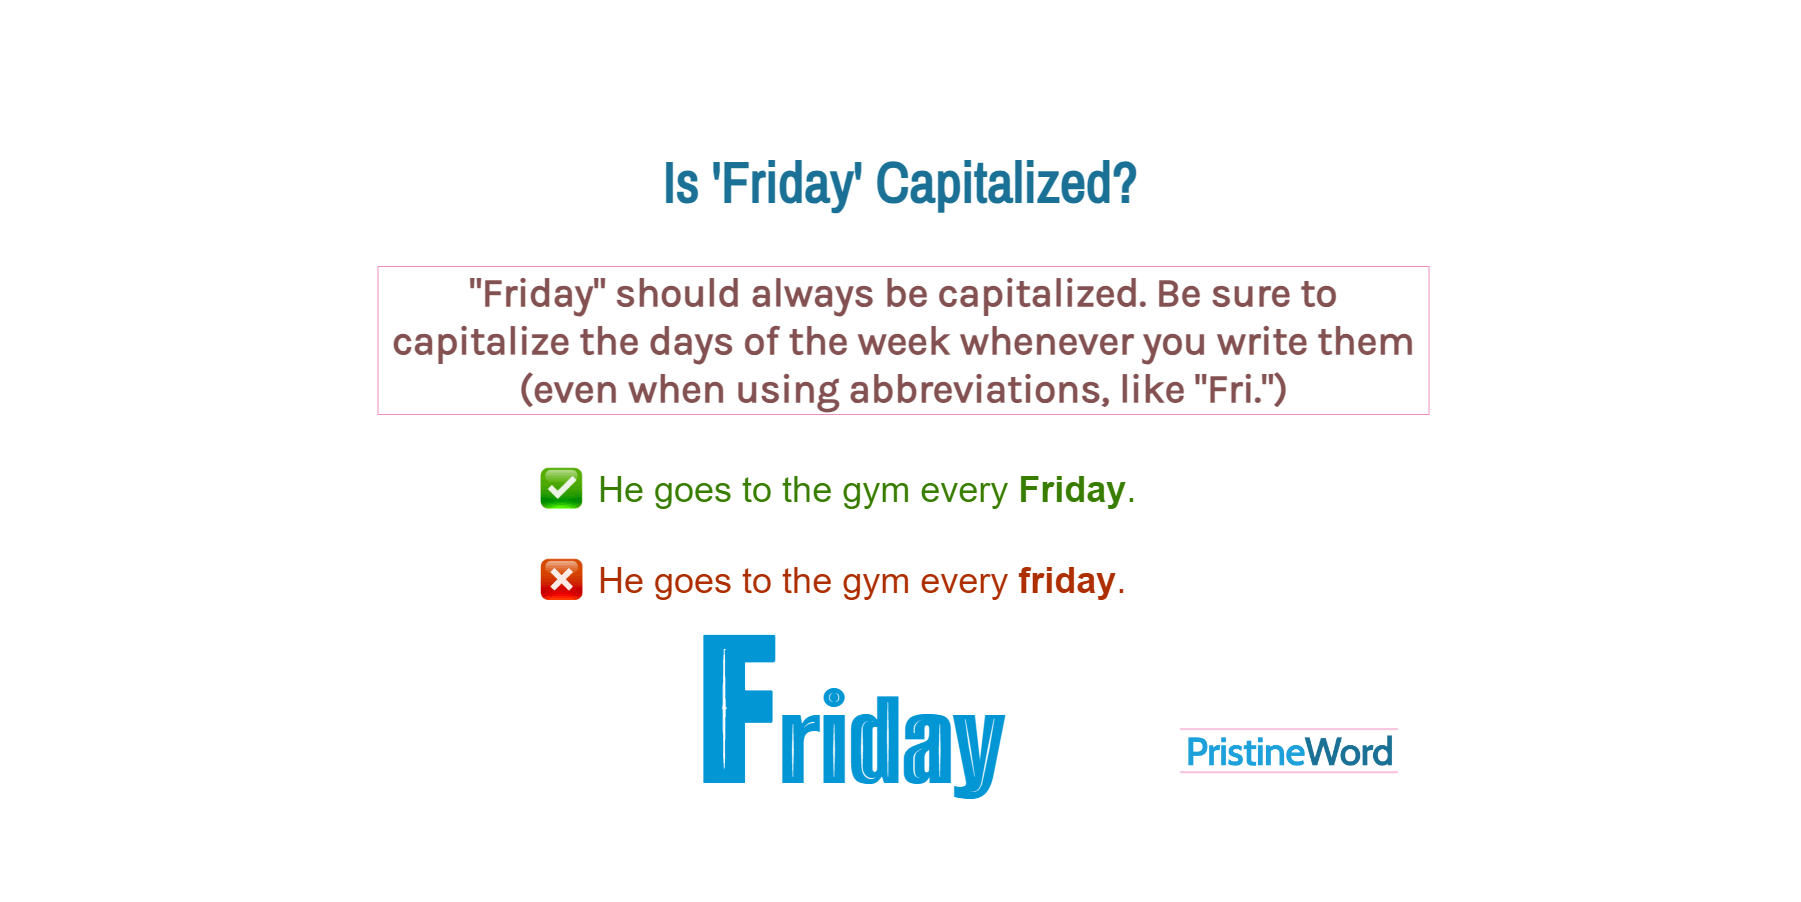 Is 'Friday' Capitalized?